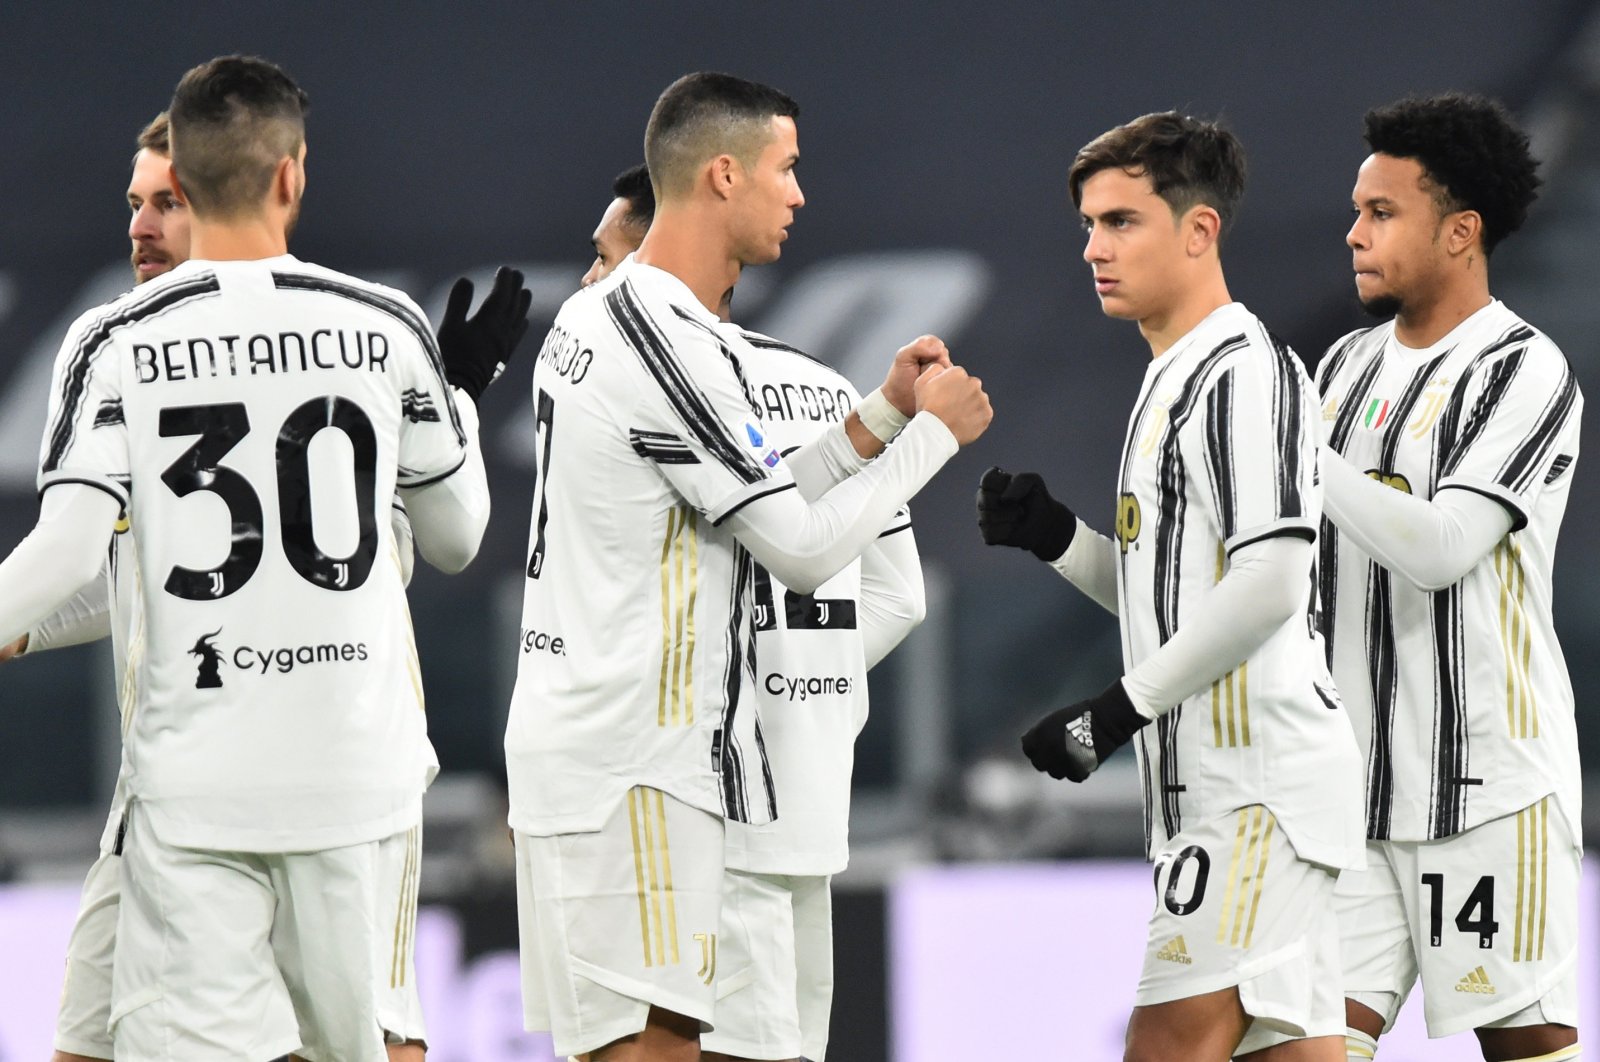 Juventus' Cristiano Ronaldo (L) and Paulo Dybala (R) before a match against Udinese, in Turin, Italy, Jan. 3, 2021. (Reuters Photo)